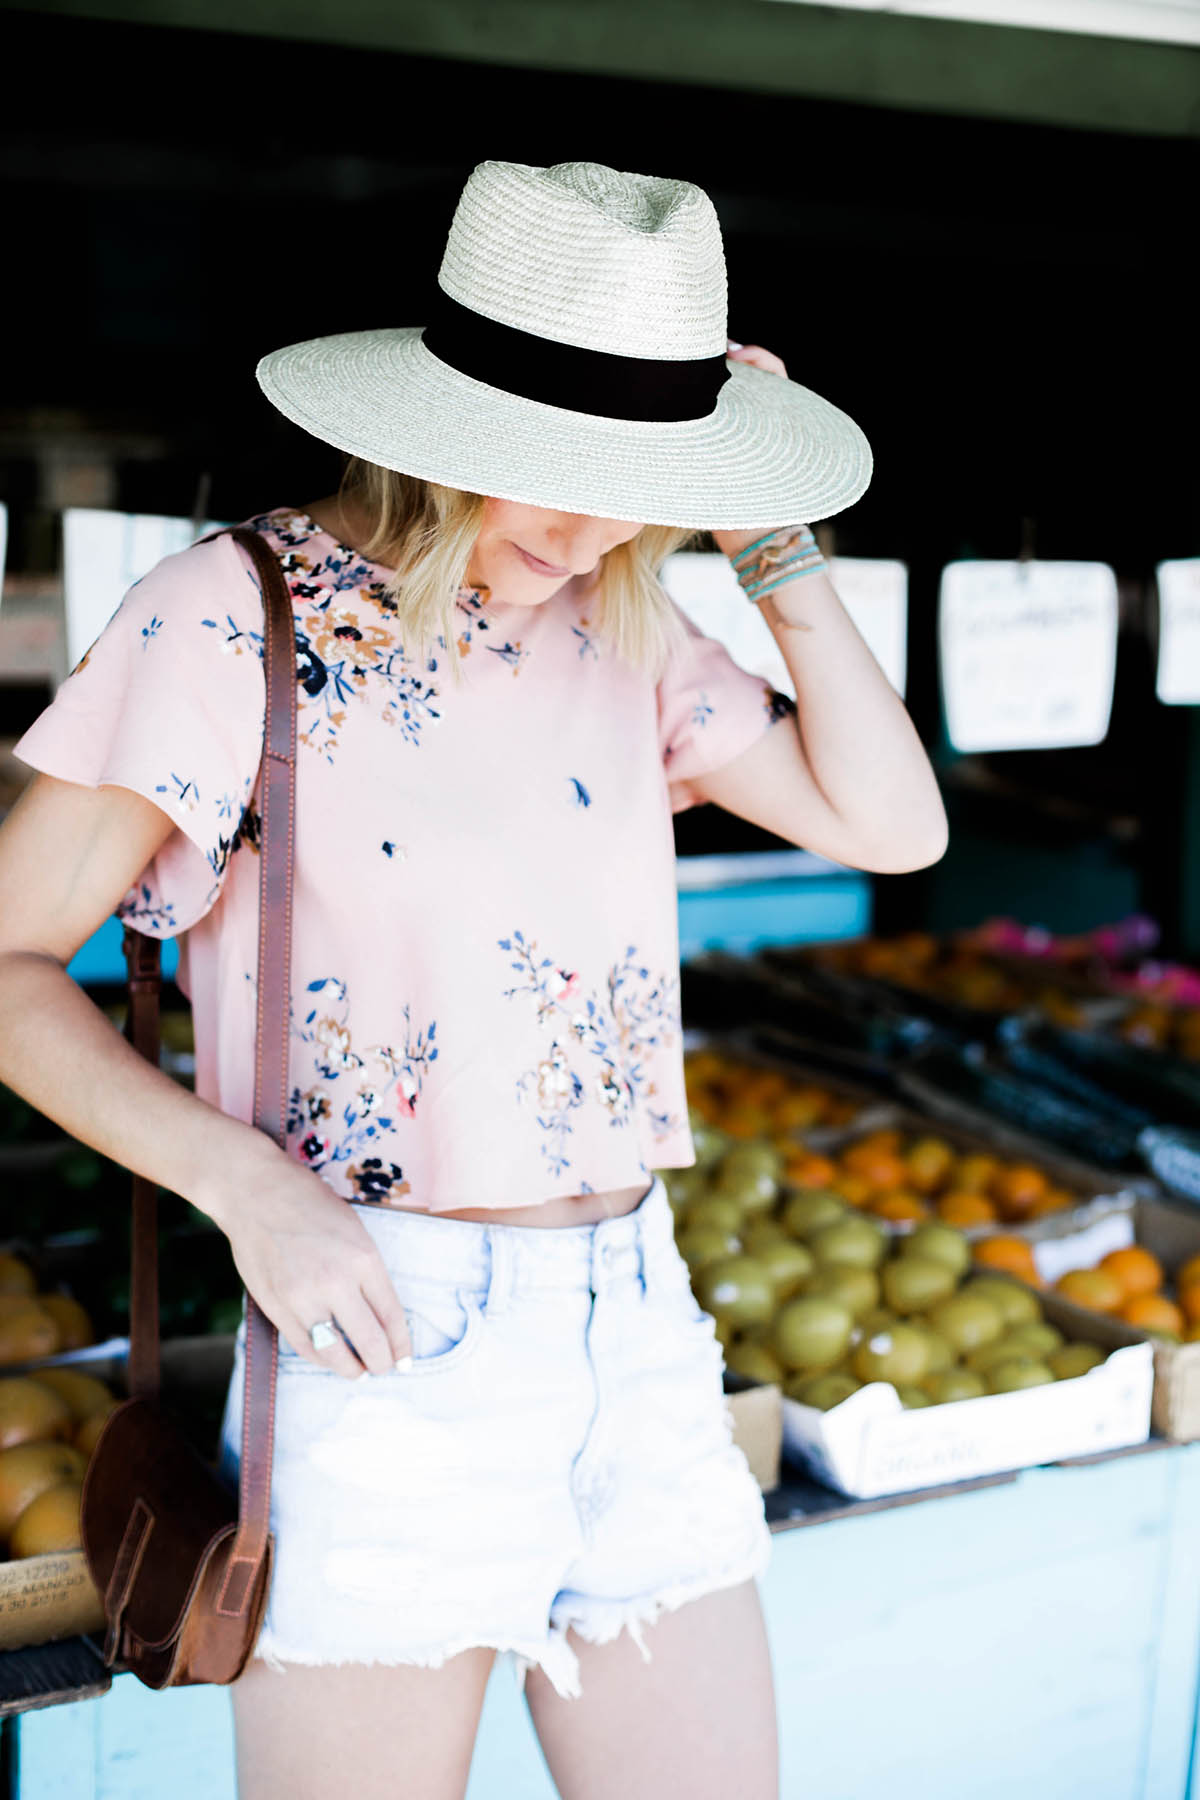 Amanda Holstein in Urban Outfitters crop top, panama hat, and denim shorts